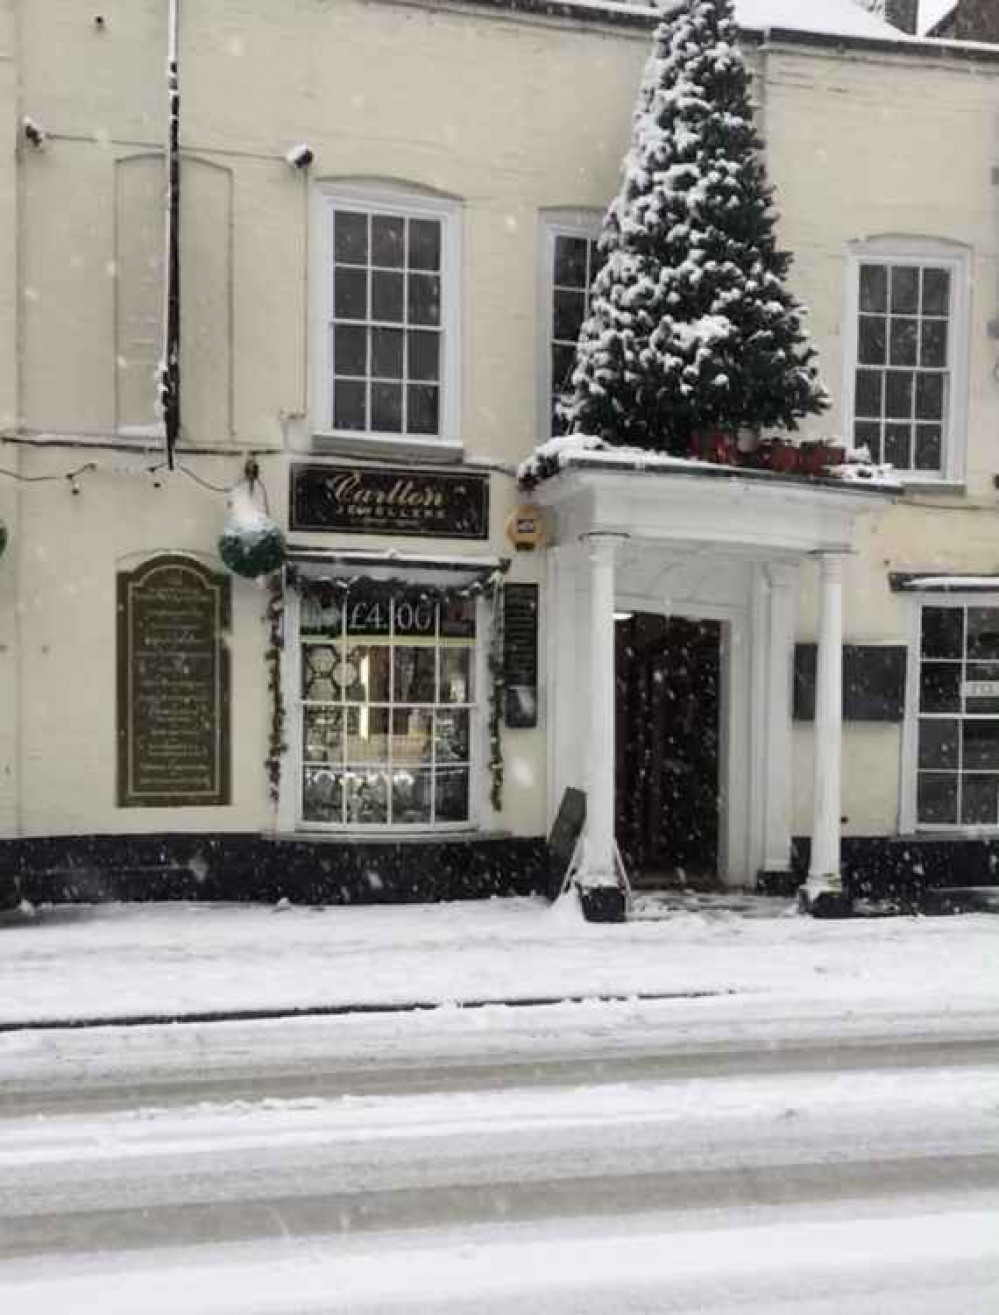 Could Maldon see snow again this weekend?